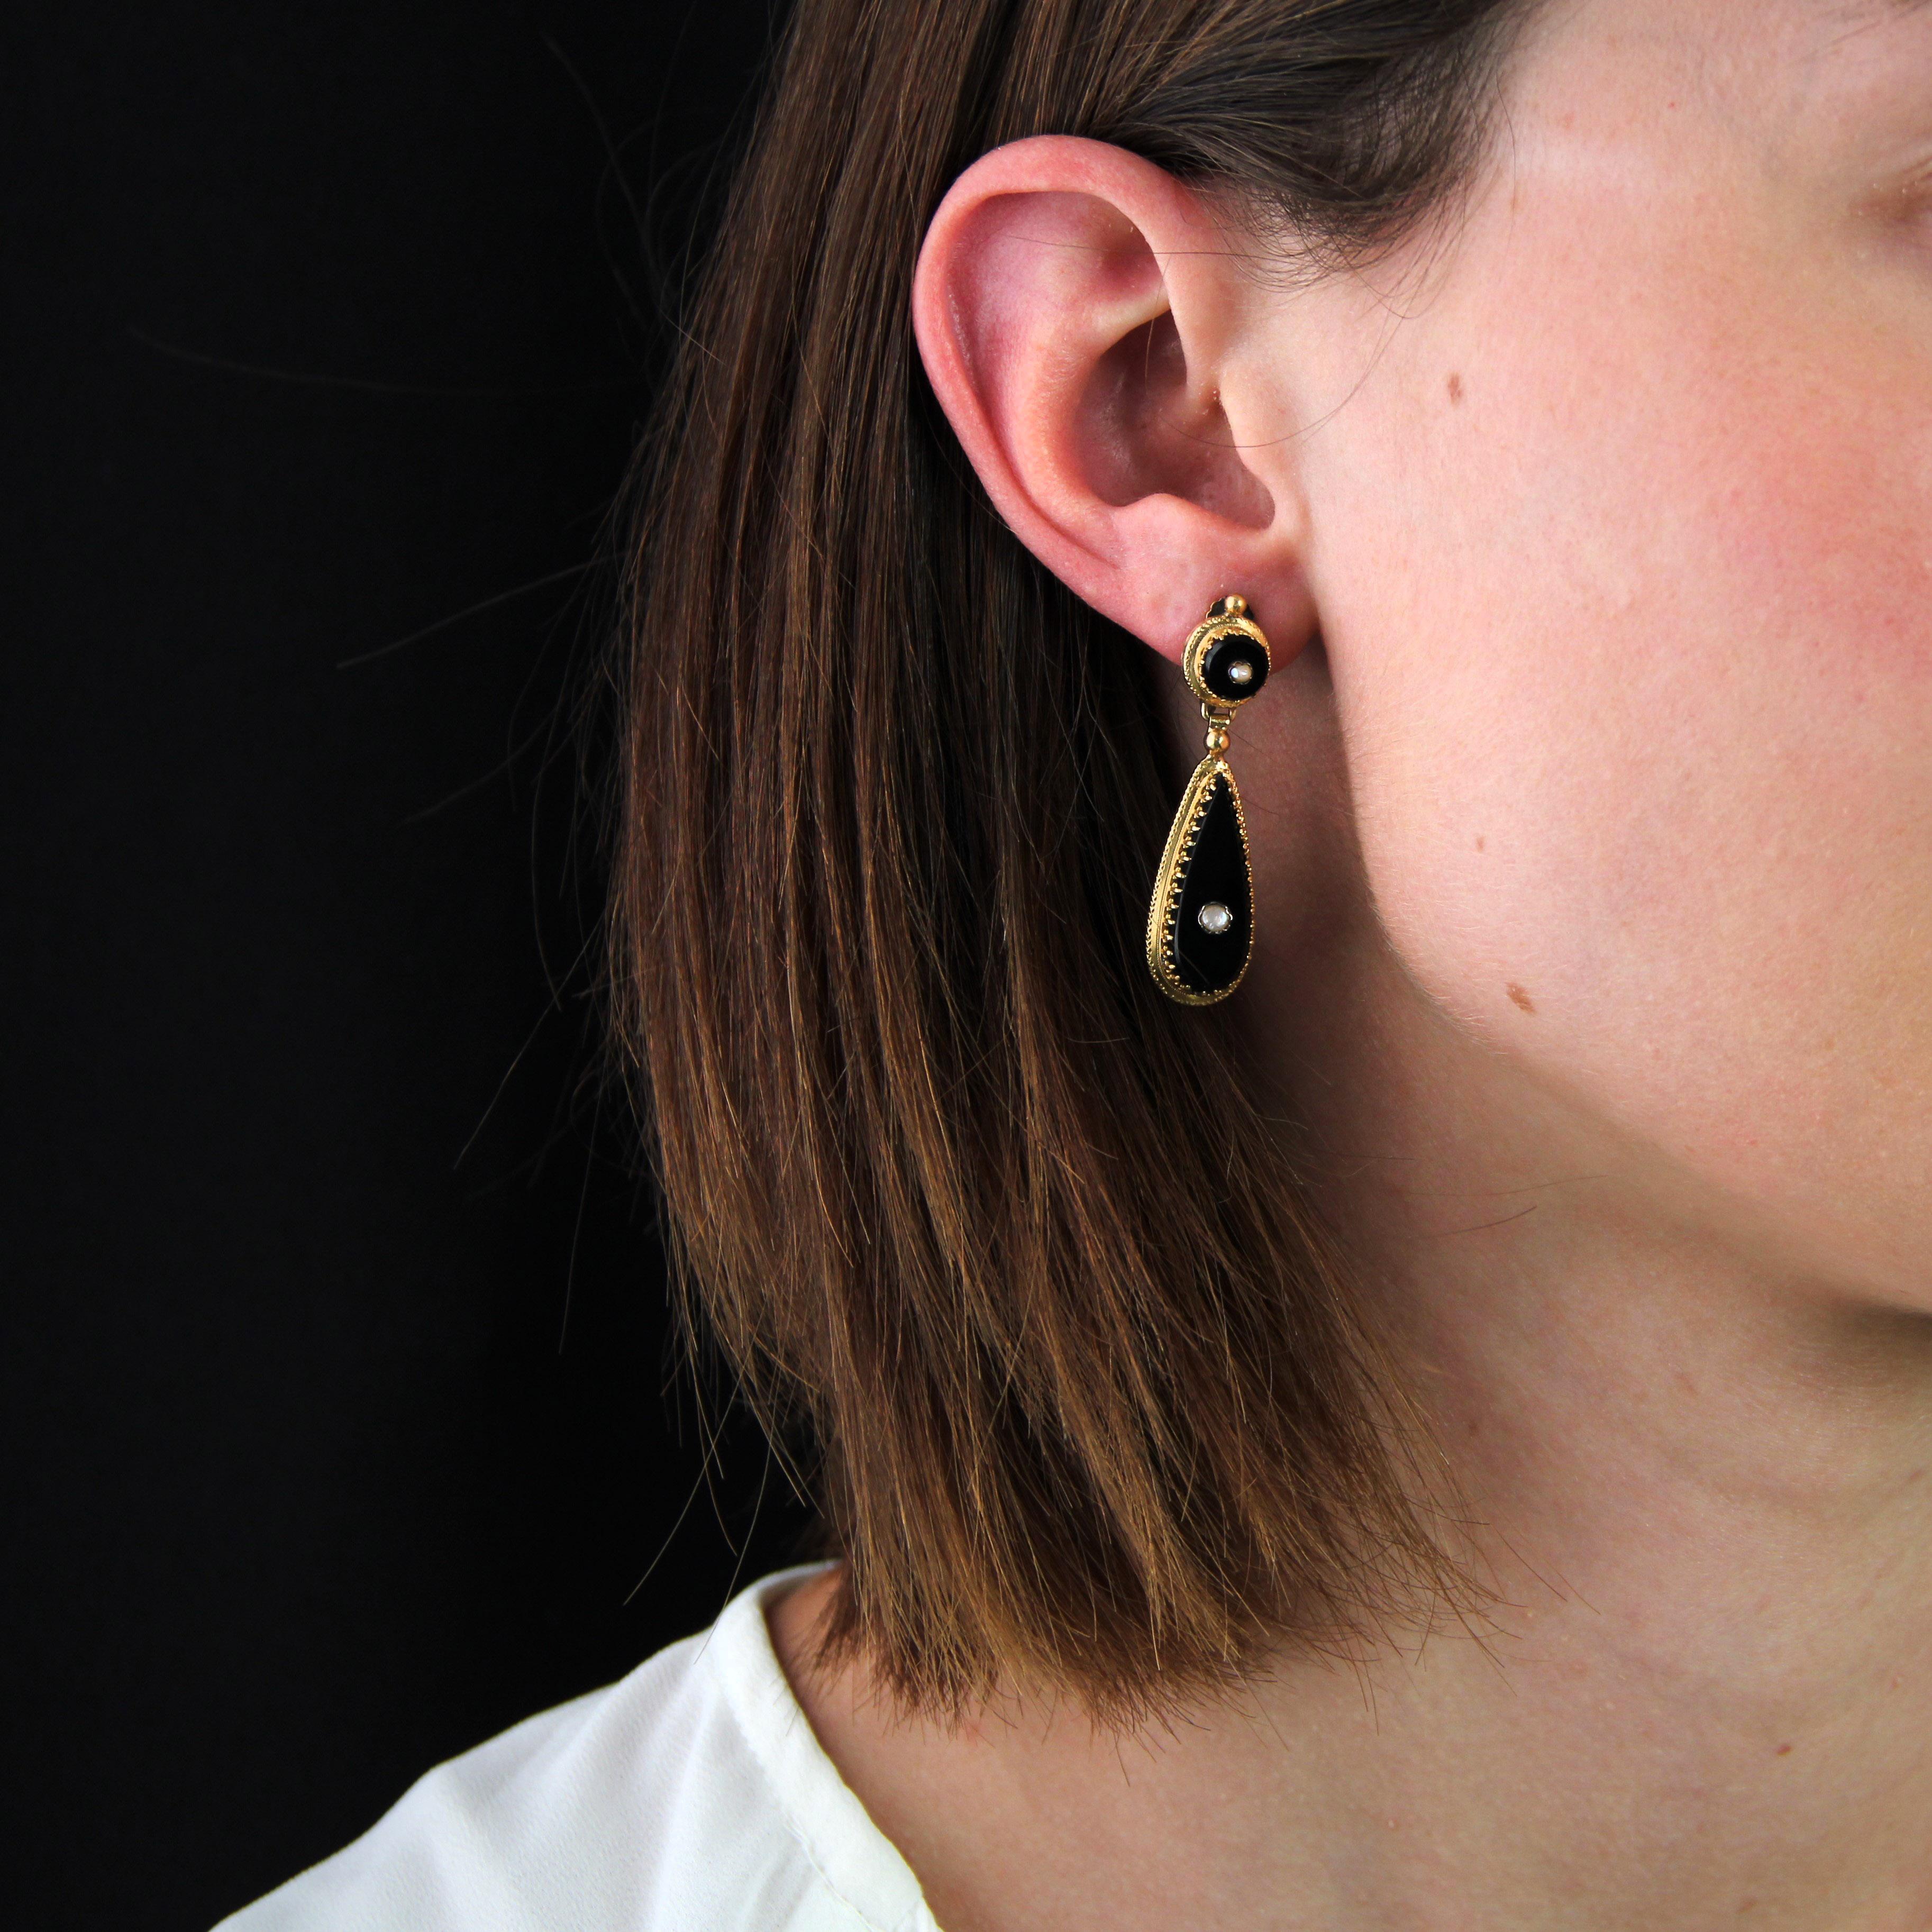 For non-pierced ears.
Earrings in 18 karat yellow gold.
A pair of earrings featuring an onyx disk centered by a fine half-pearl held in place by lily flower claws. The same pear-shaped motif is attached as a pendant. The attachment system is